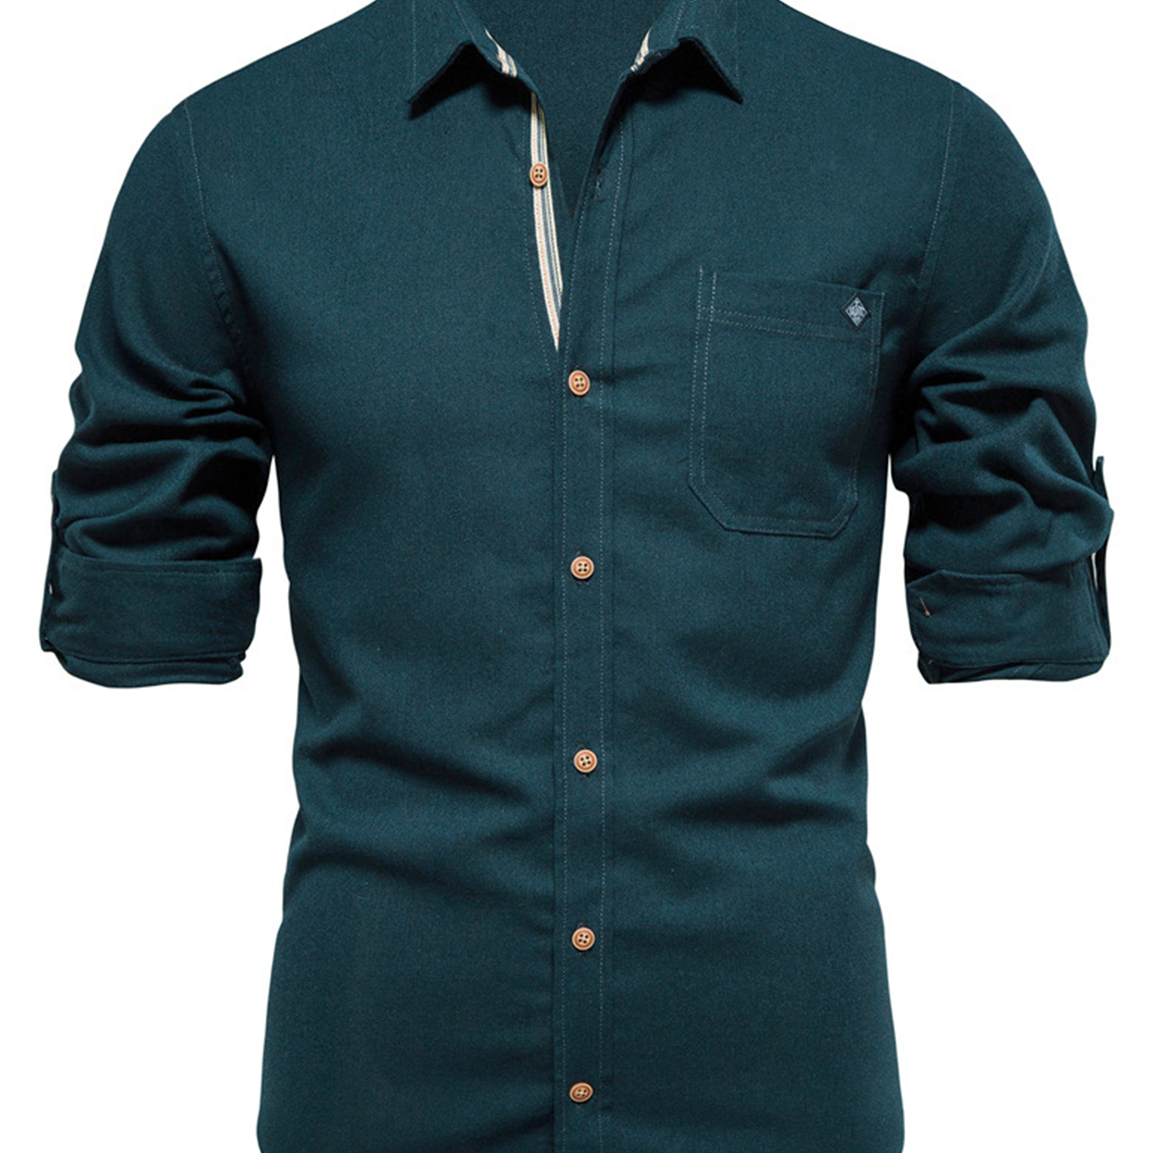 Men's Cotton Solid Color Pocket Button Up Long Sleeve Casual Shirt